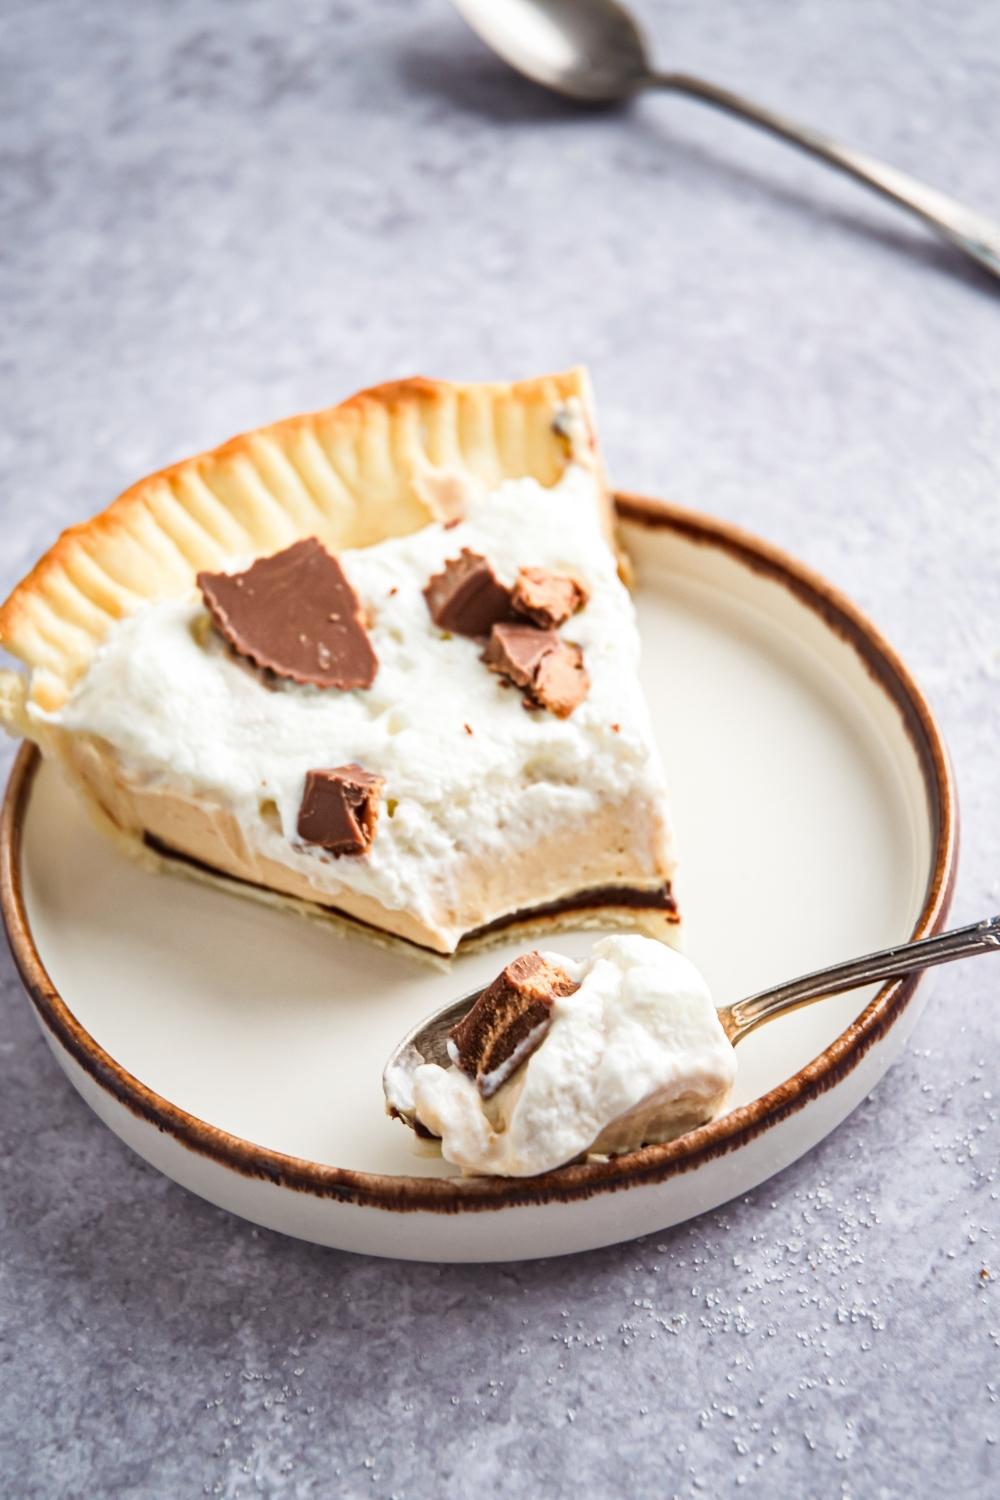 One slice of Reese's peanut butter pie on a small plate. A scoop is removed from the slice and on top of a spoon laying next to the pie slice.